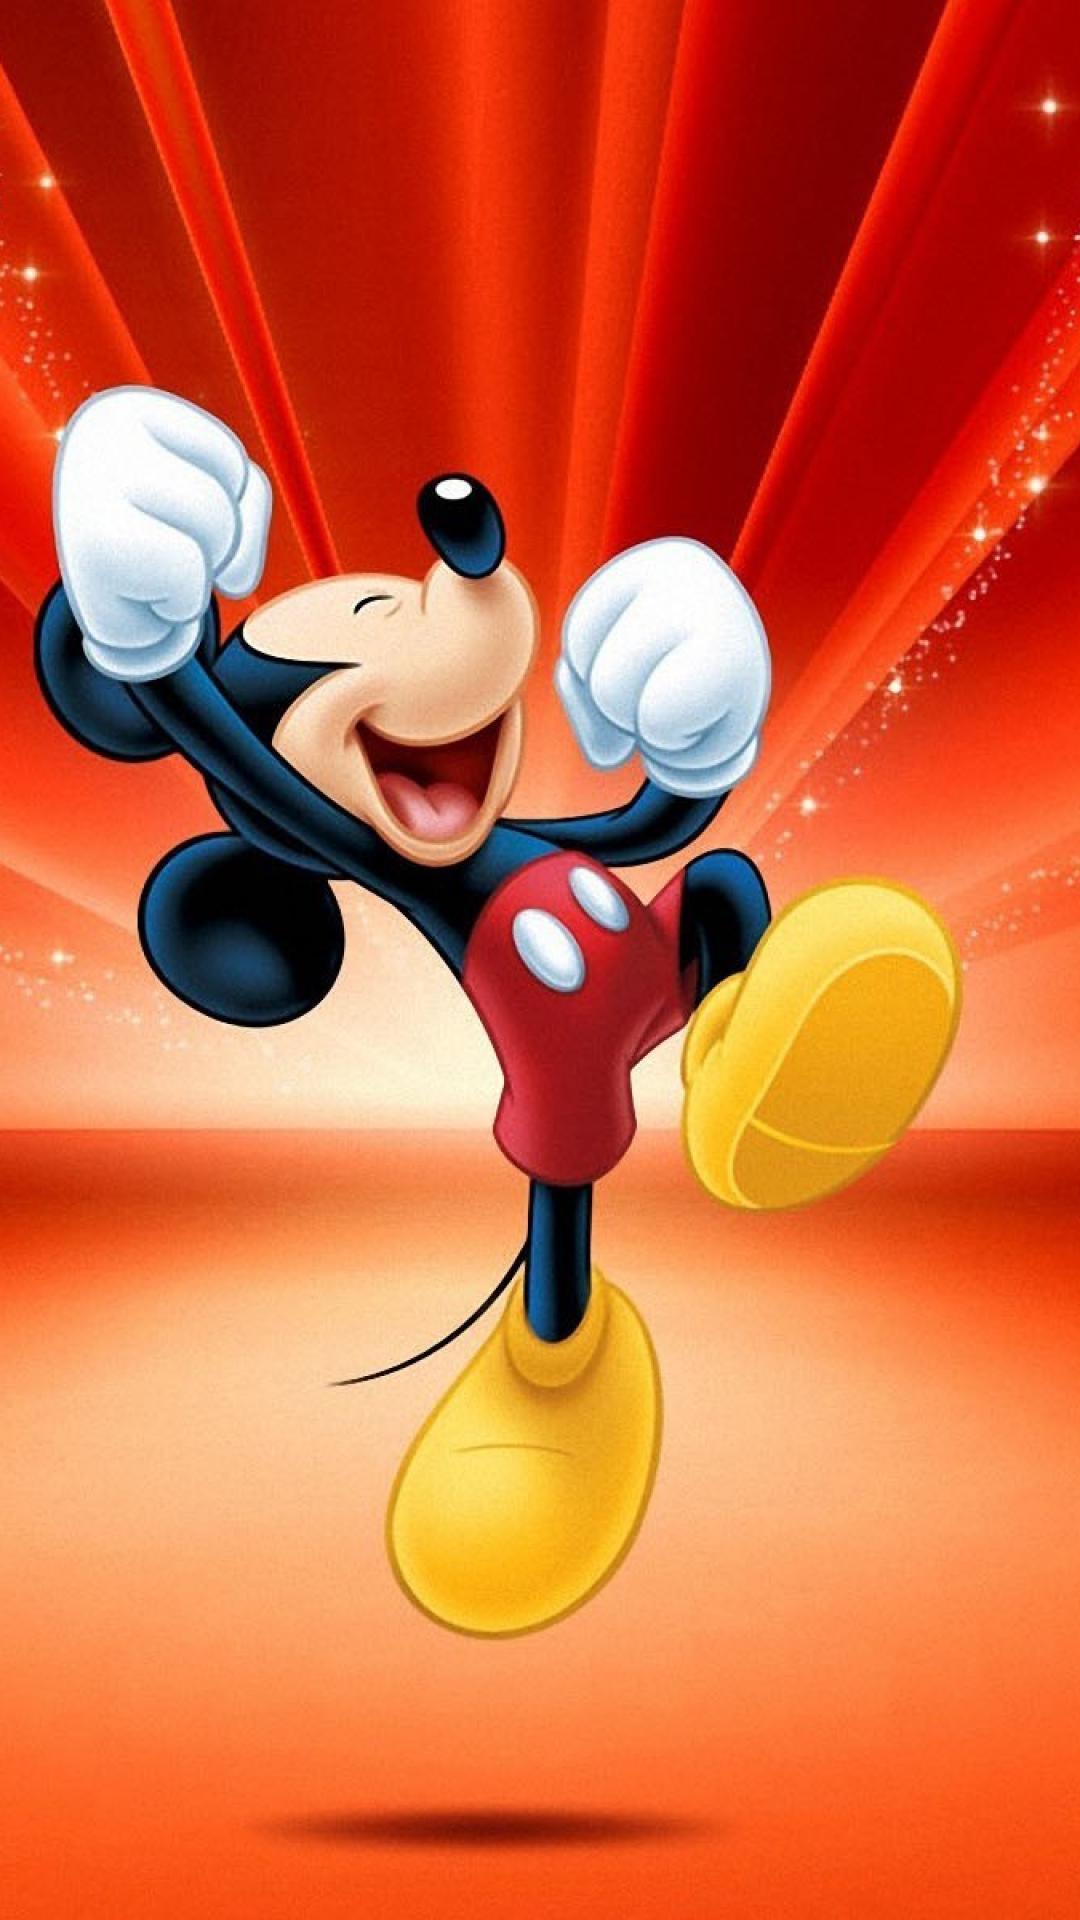 1080 x 1920 · jpeg - Mickey Mouse For Mobile Wallpapers - Wallpaper Cave